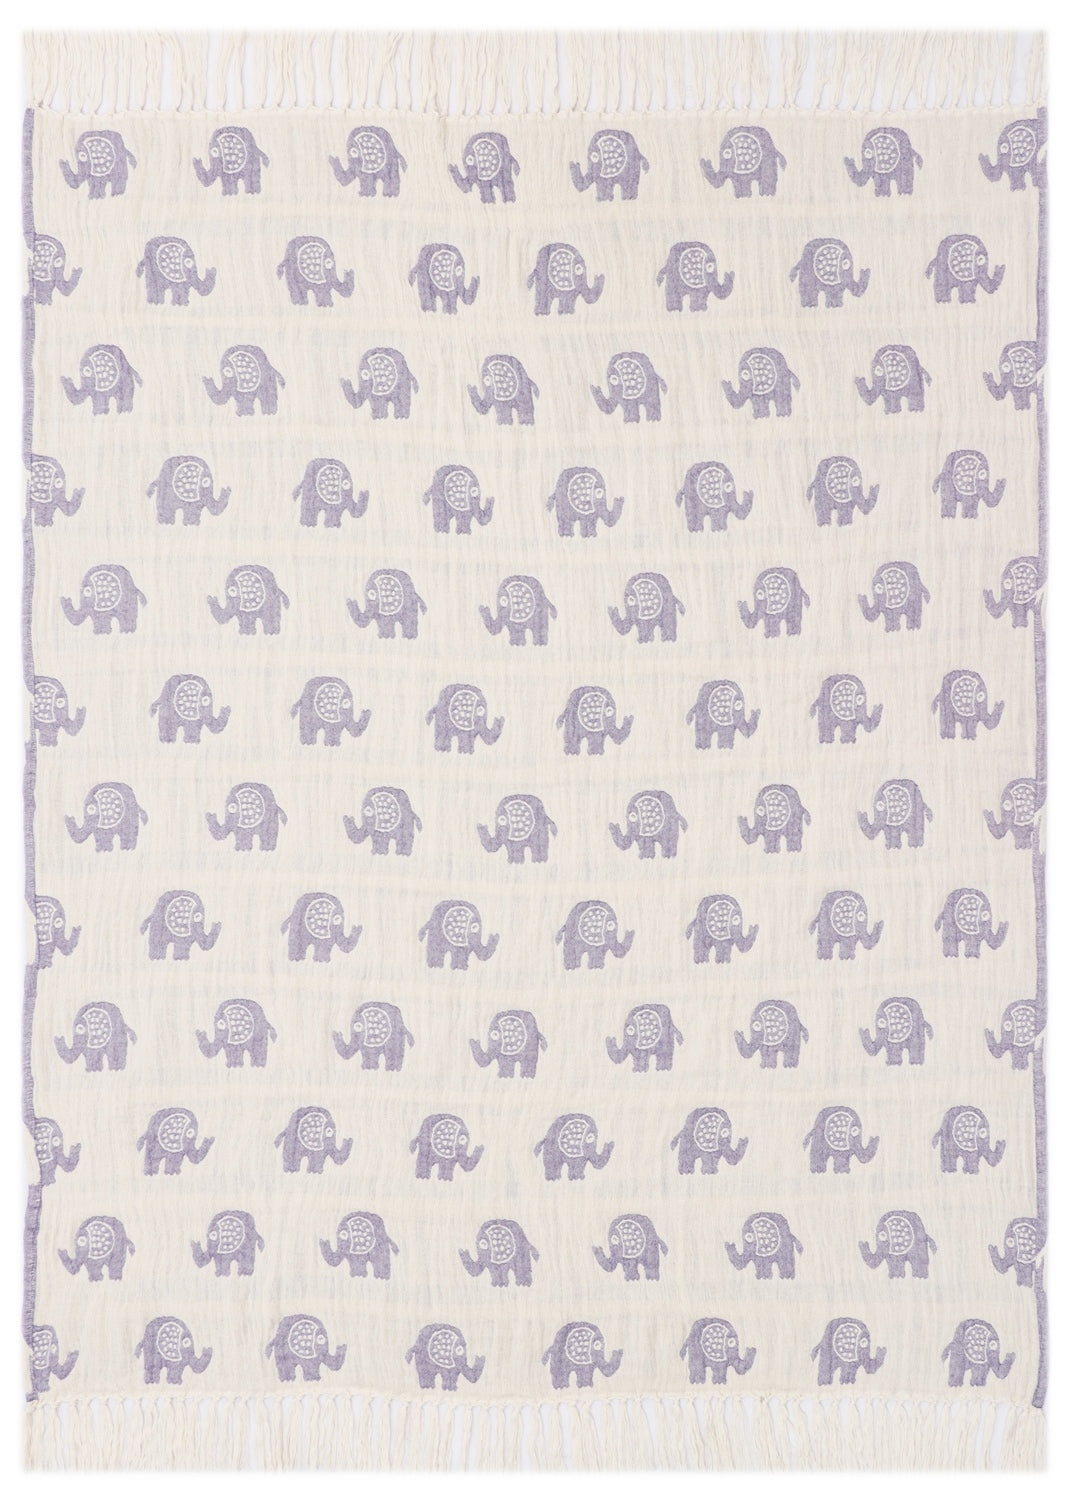 Lavender and Ivory Reversible Cotton Jacquard Throw